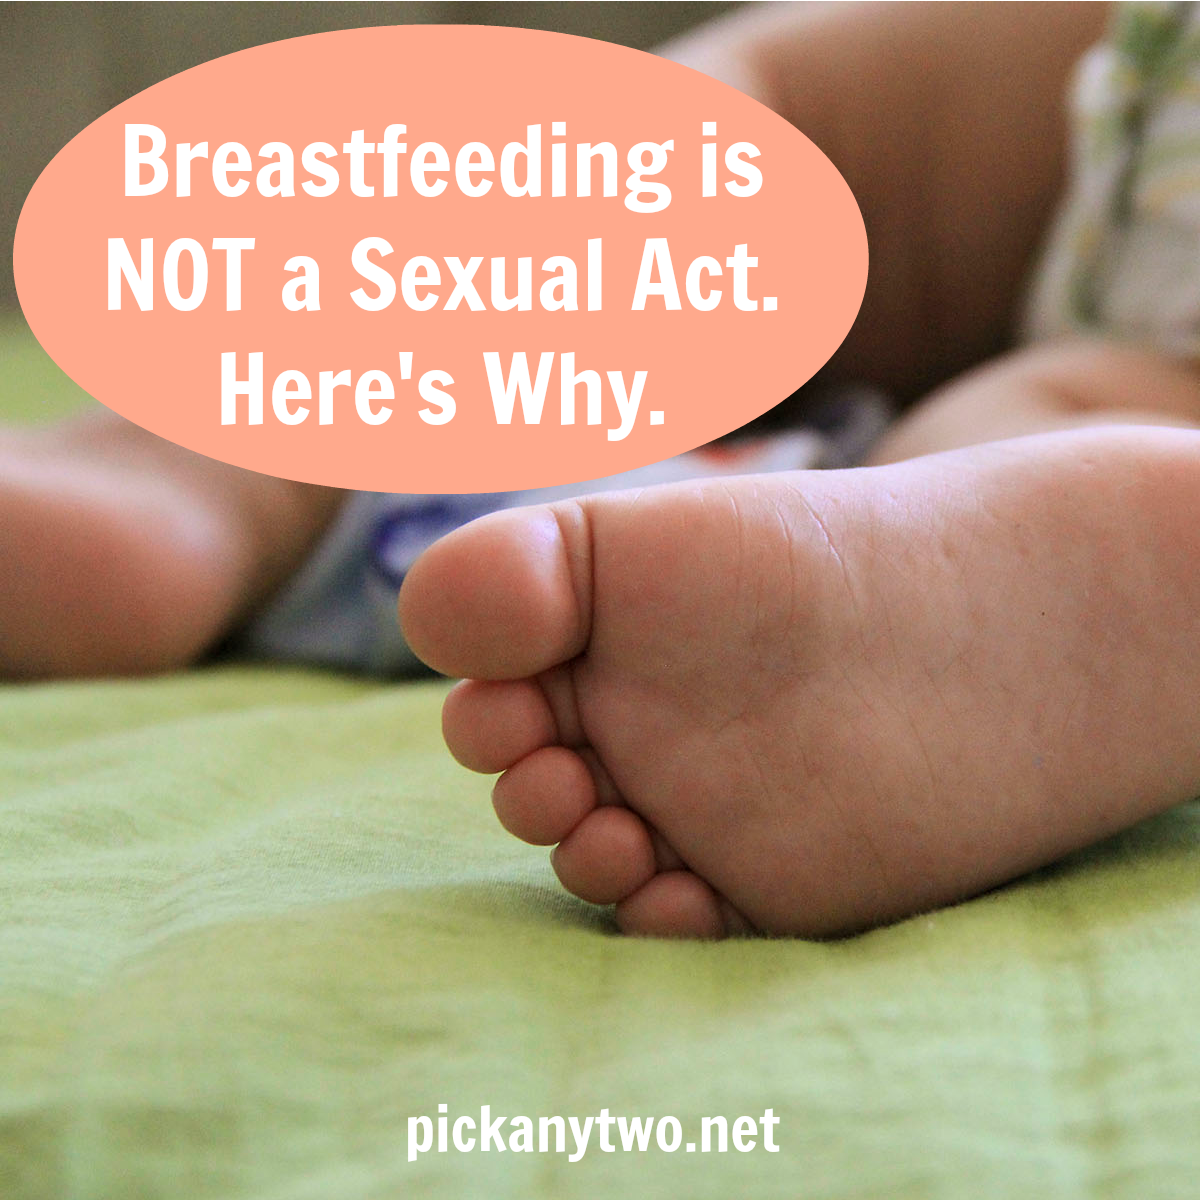 Breastfeeding is NOT a Sexual Act. Here’s Why.